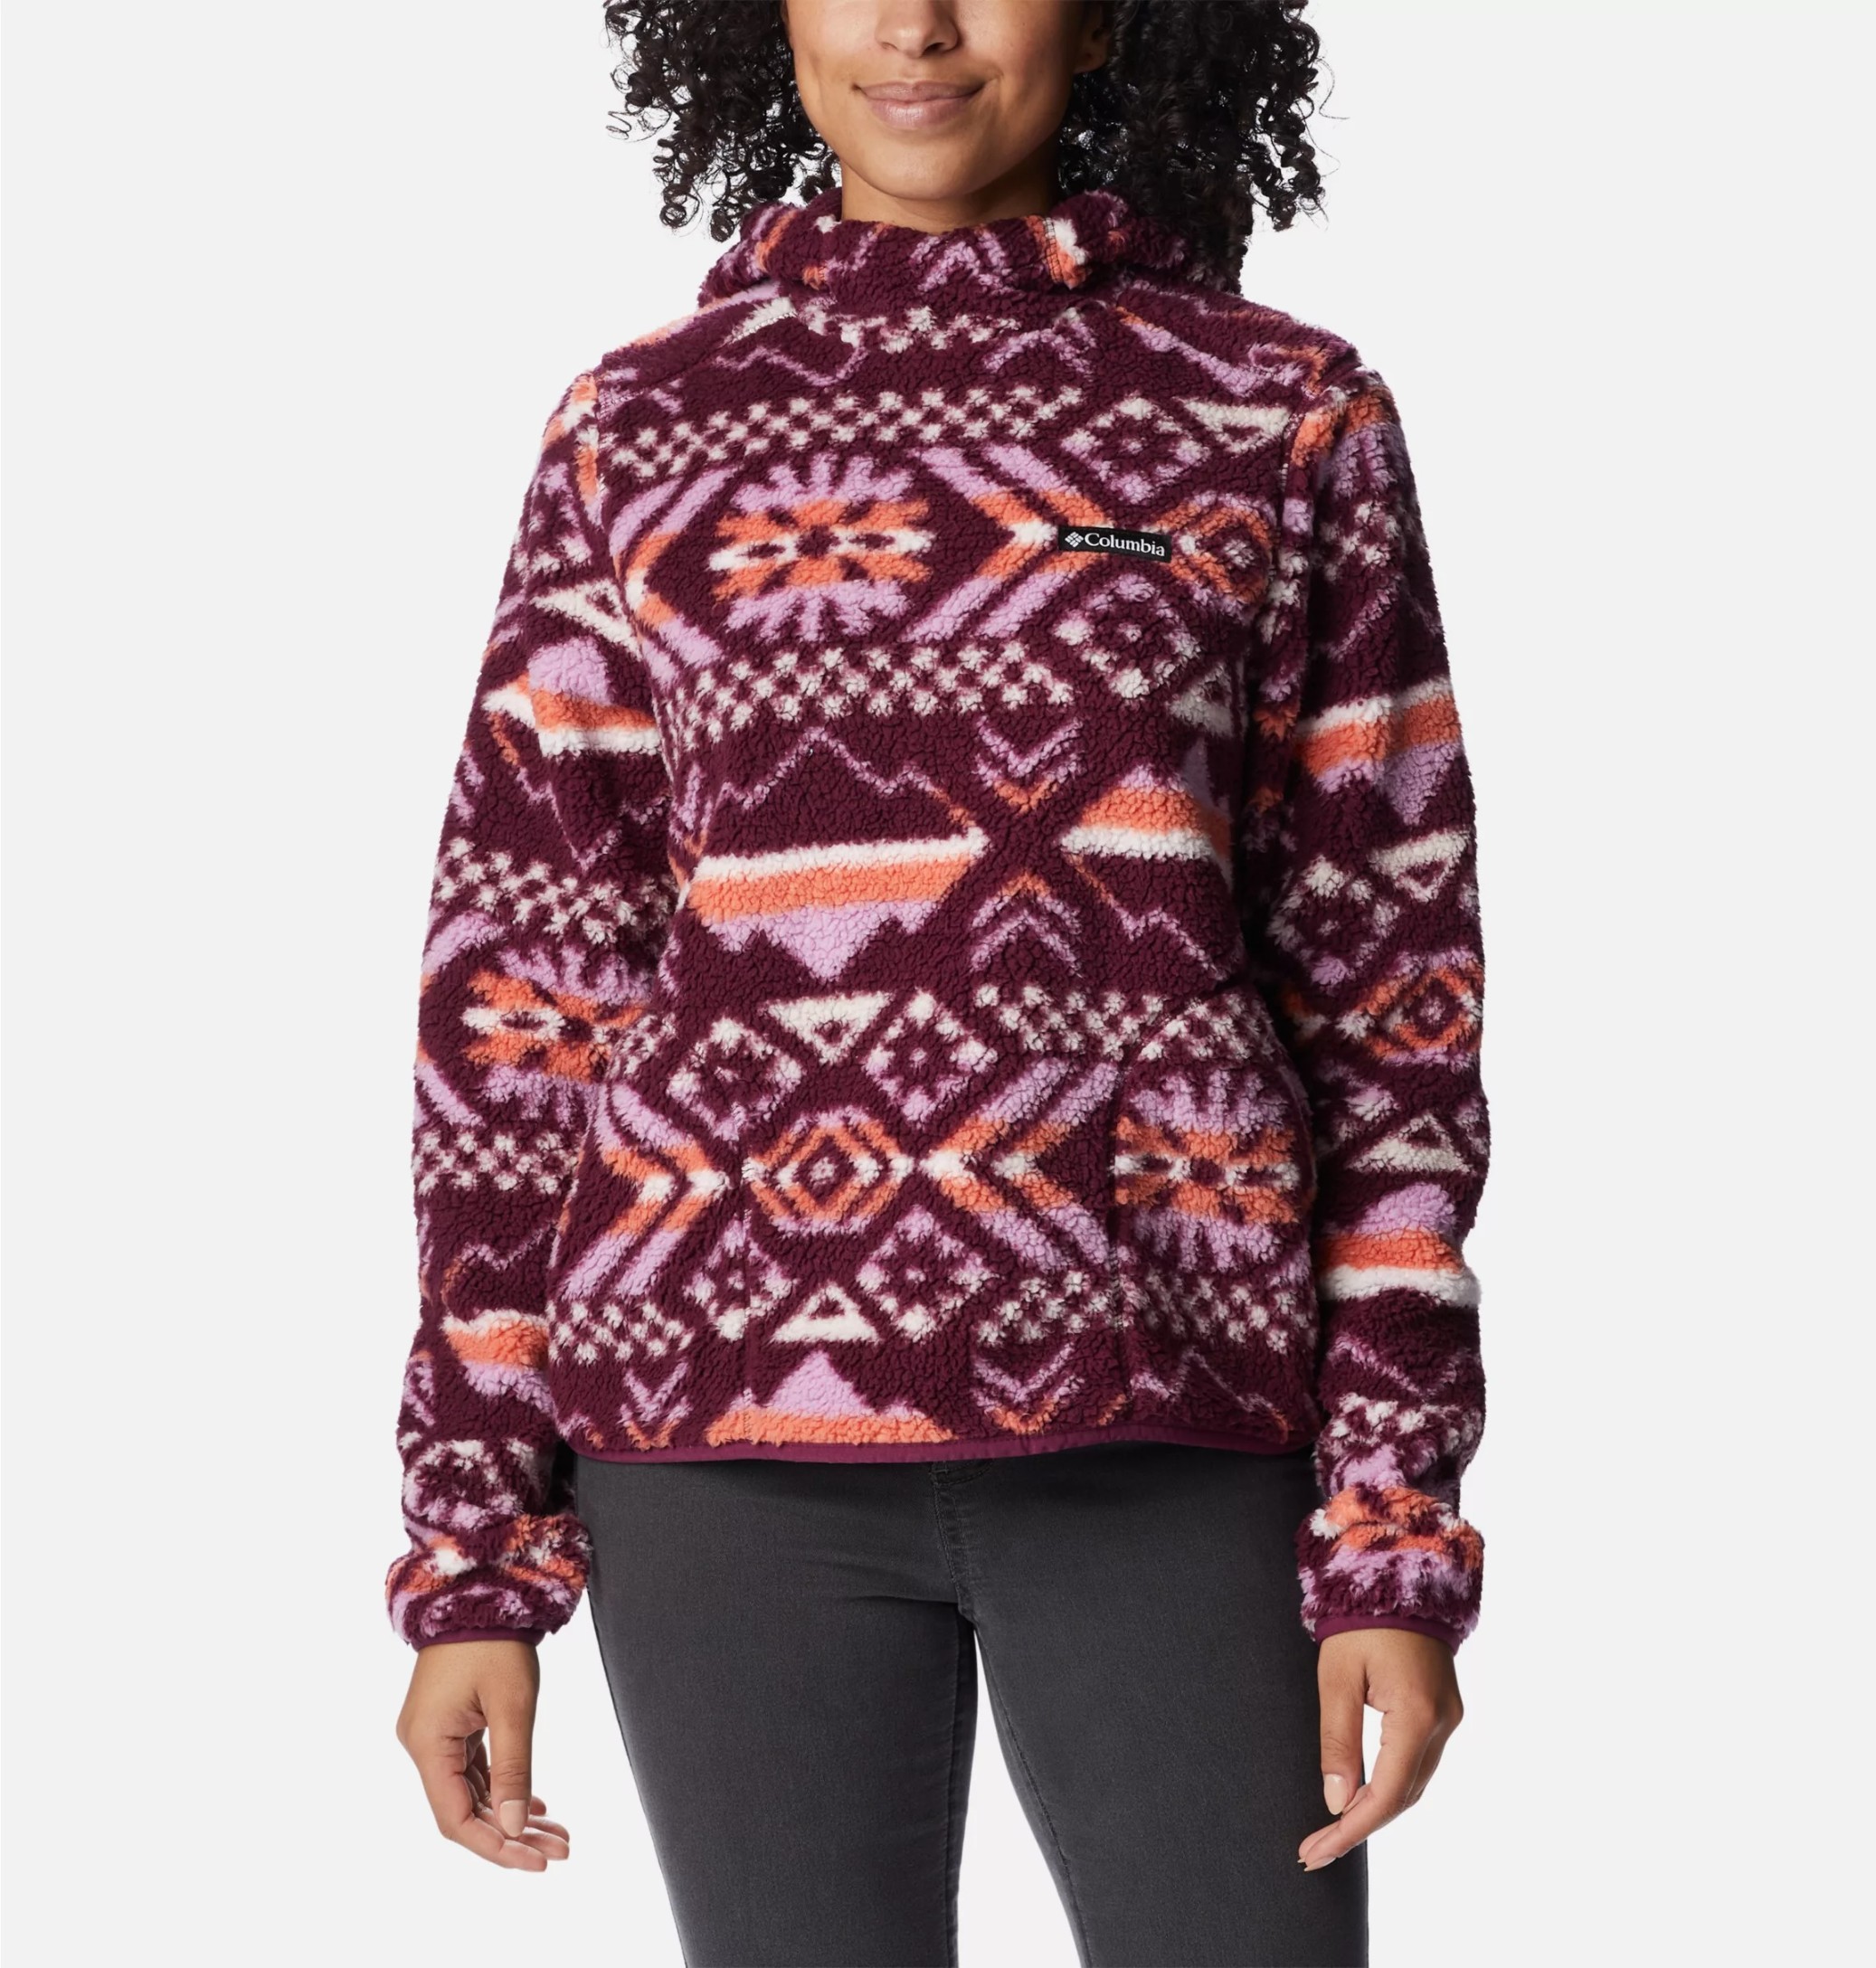 FORRO POLAR CAPUCHA WEST BEND HOODIE MARIONBERRY CHECKERED PEAKS